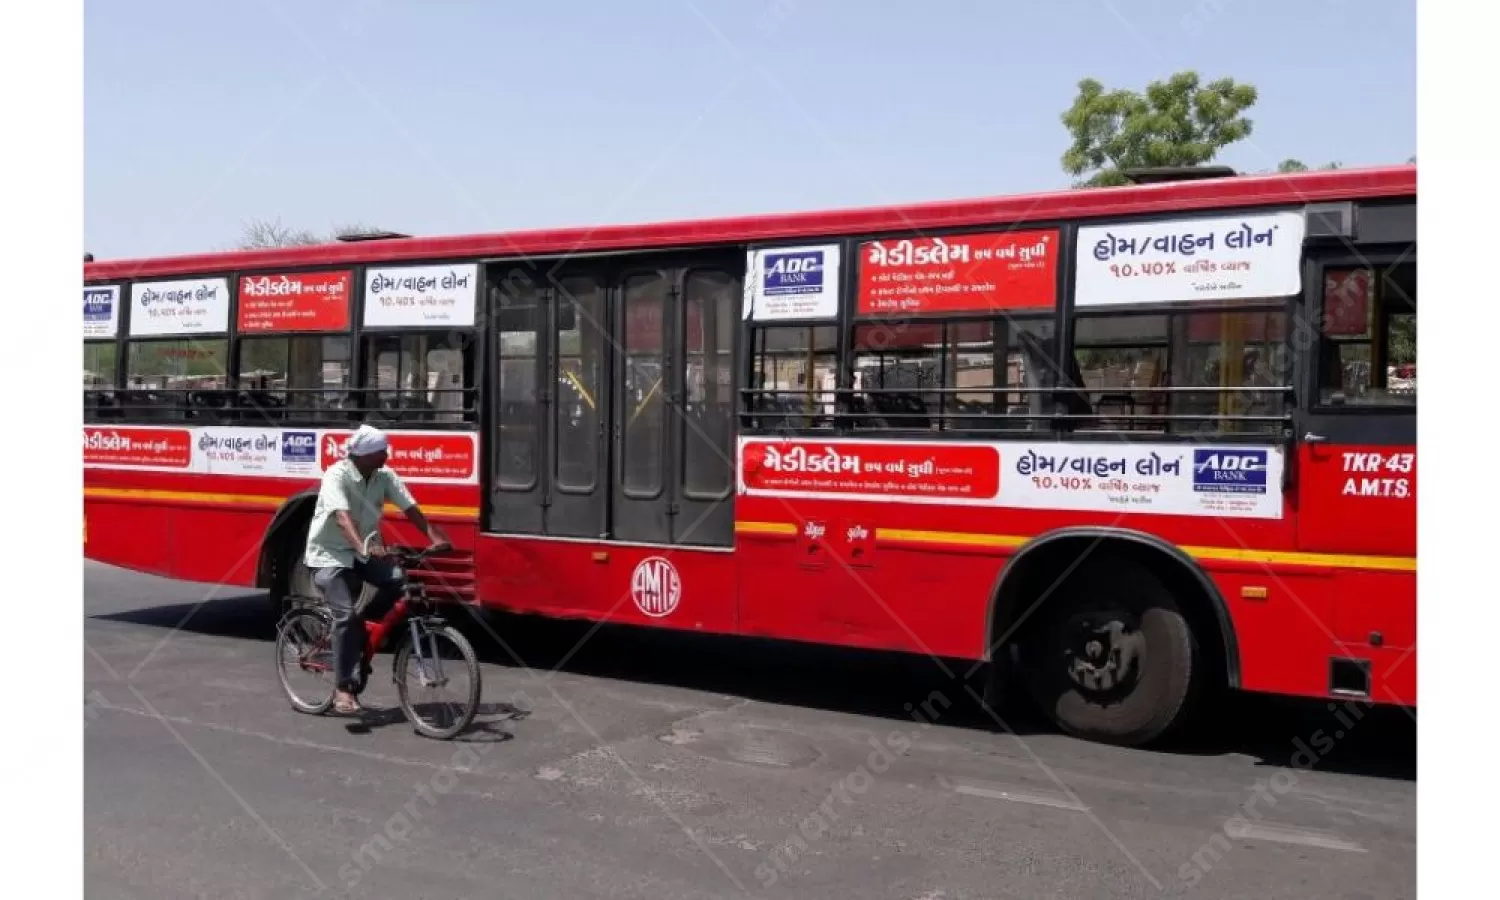 Non-Traditional Media Bus Advertising in Ahmedabad